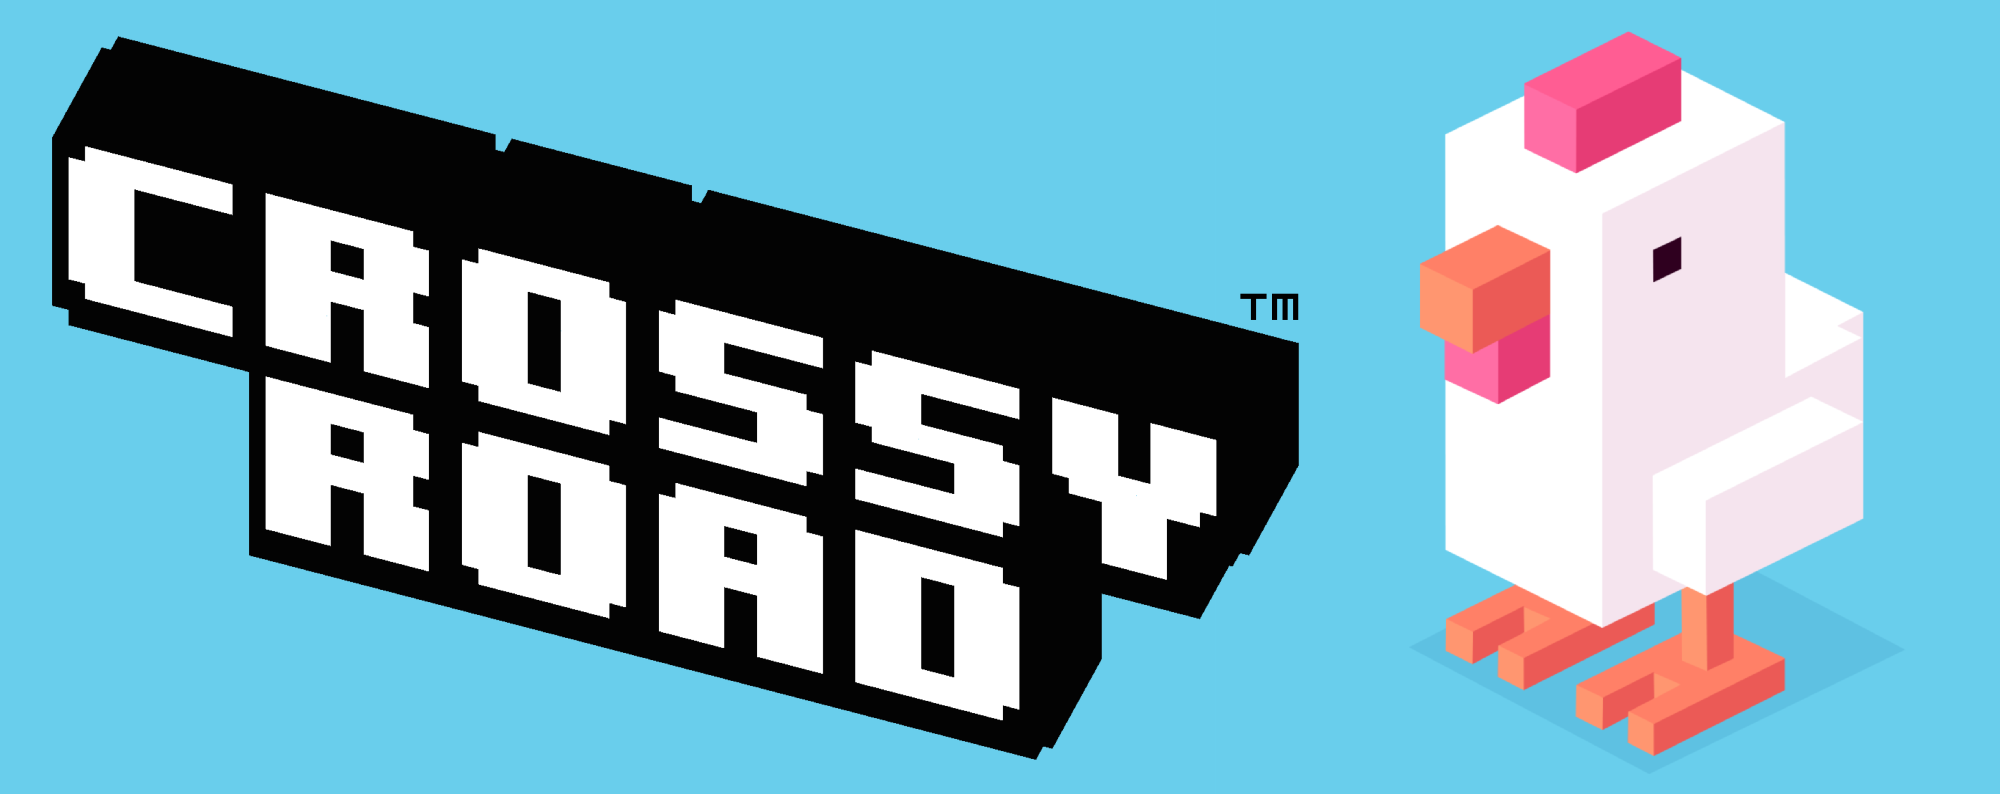 Crossy Road Header.png - Crossy Road, Transparent background PNG HD thumbnail